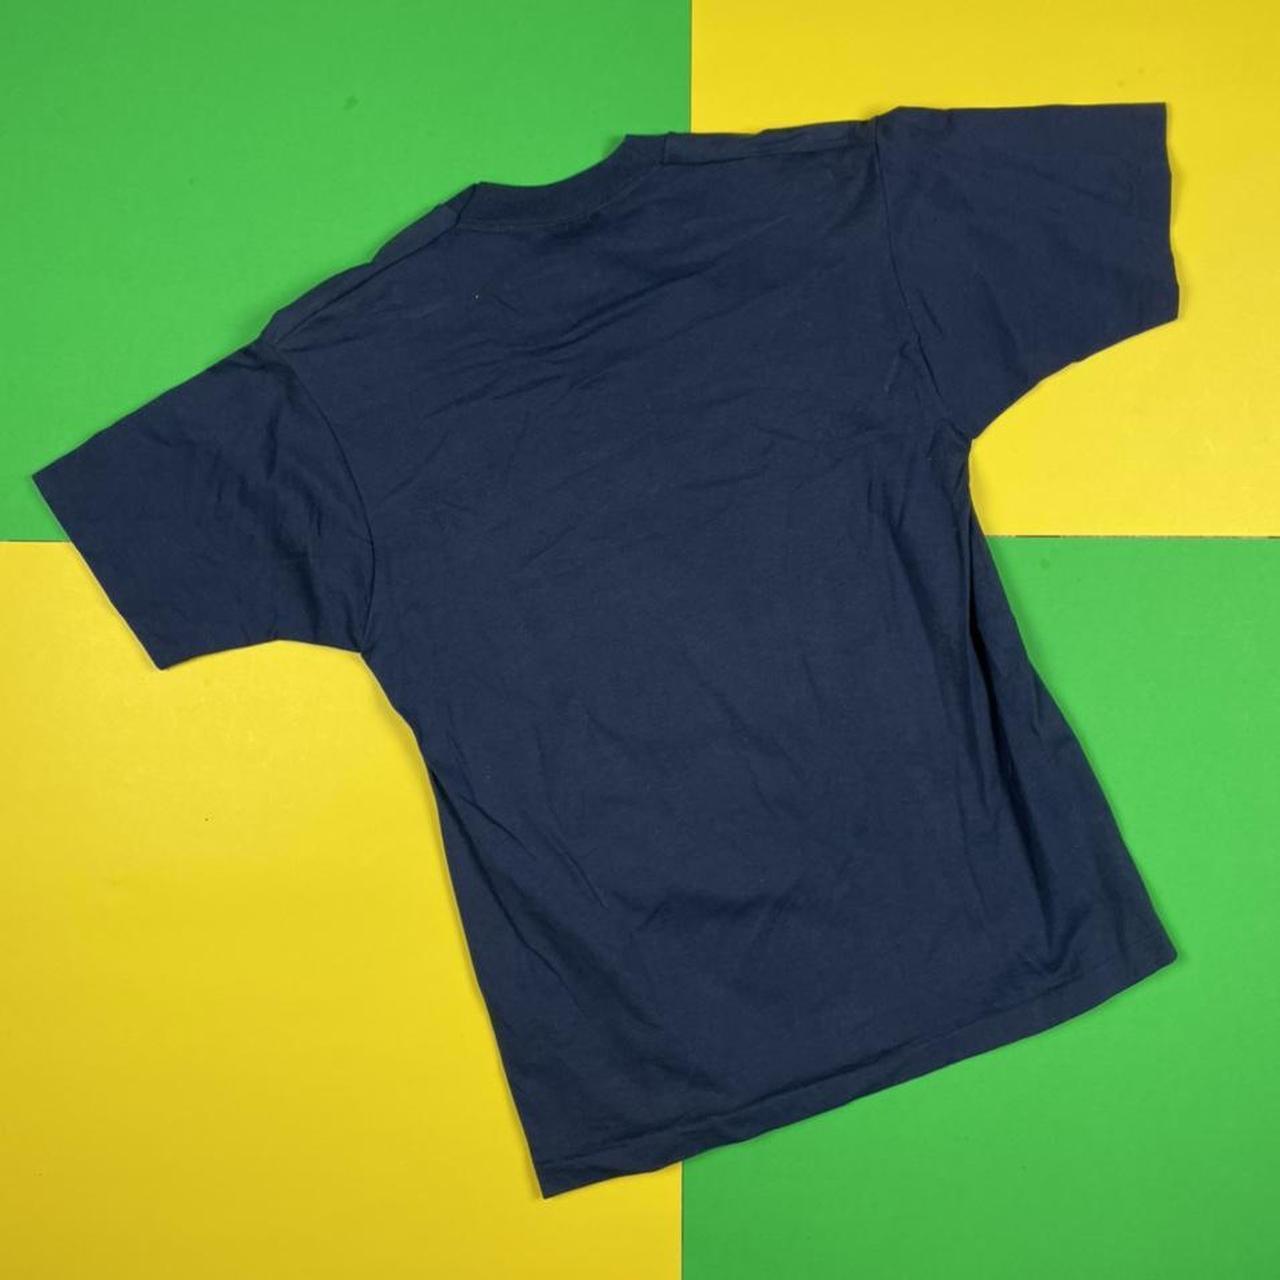 Reclaimed Vintage Men's Navy and Yellow T-shirt (4)